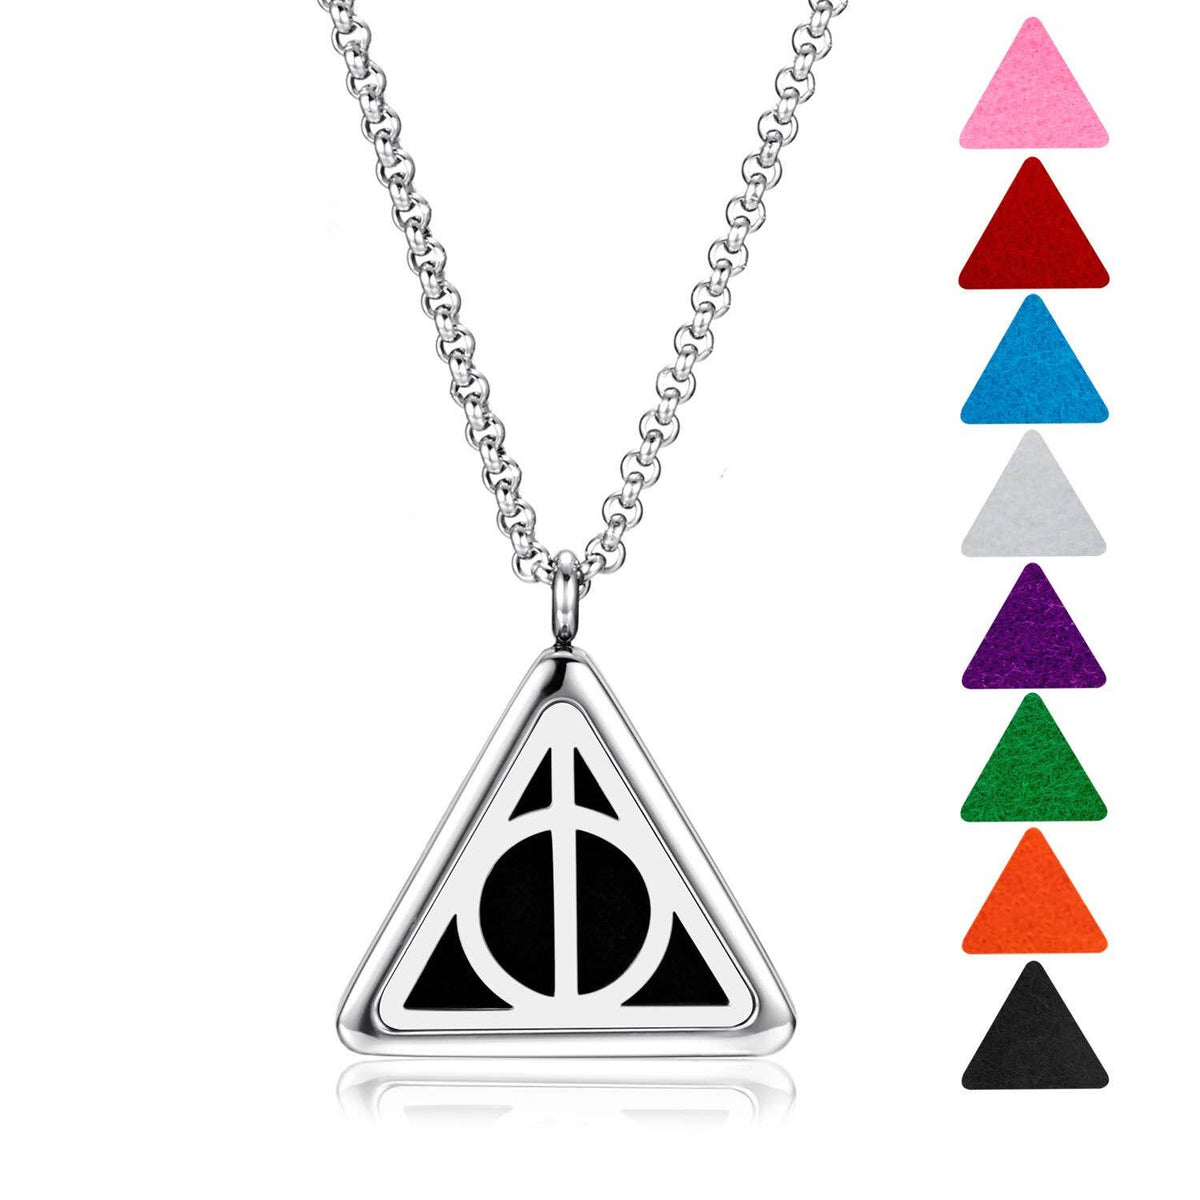 Potter Hallows Chrome Aromatherapy Diffuser Necklace with 12 color pads